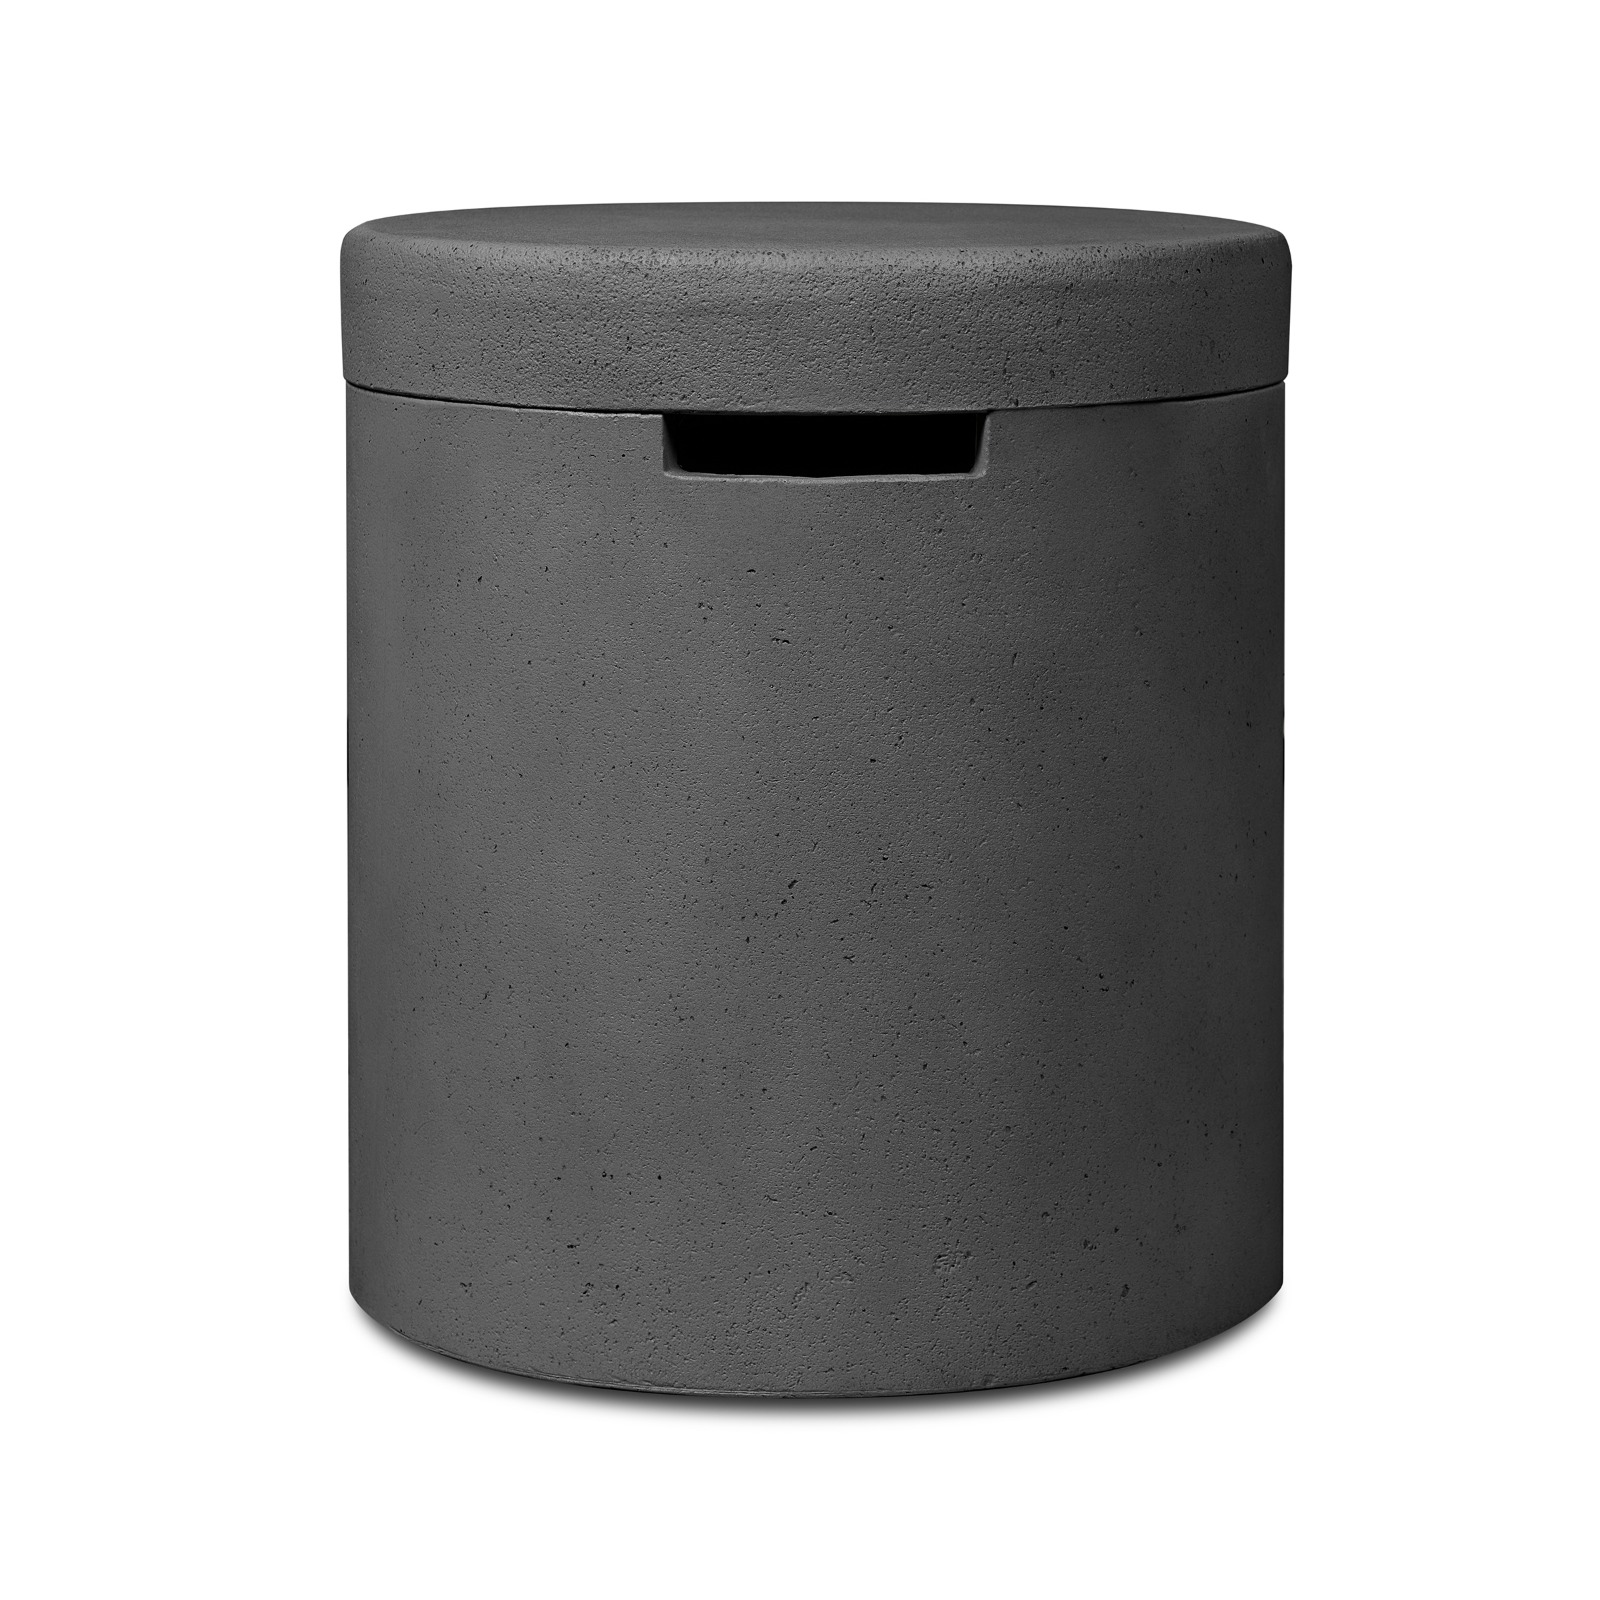 Gray Propane Tank Cover for La Valle Outdoor Propane Gas Fire Pit